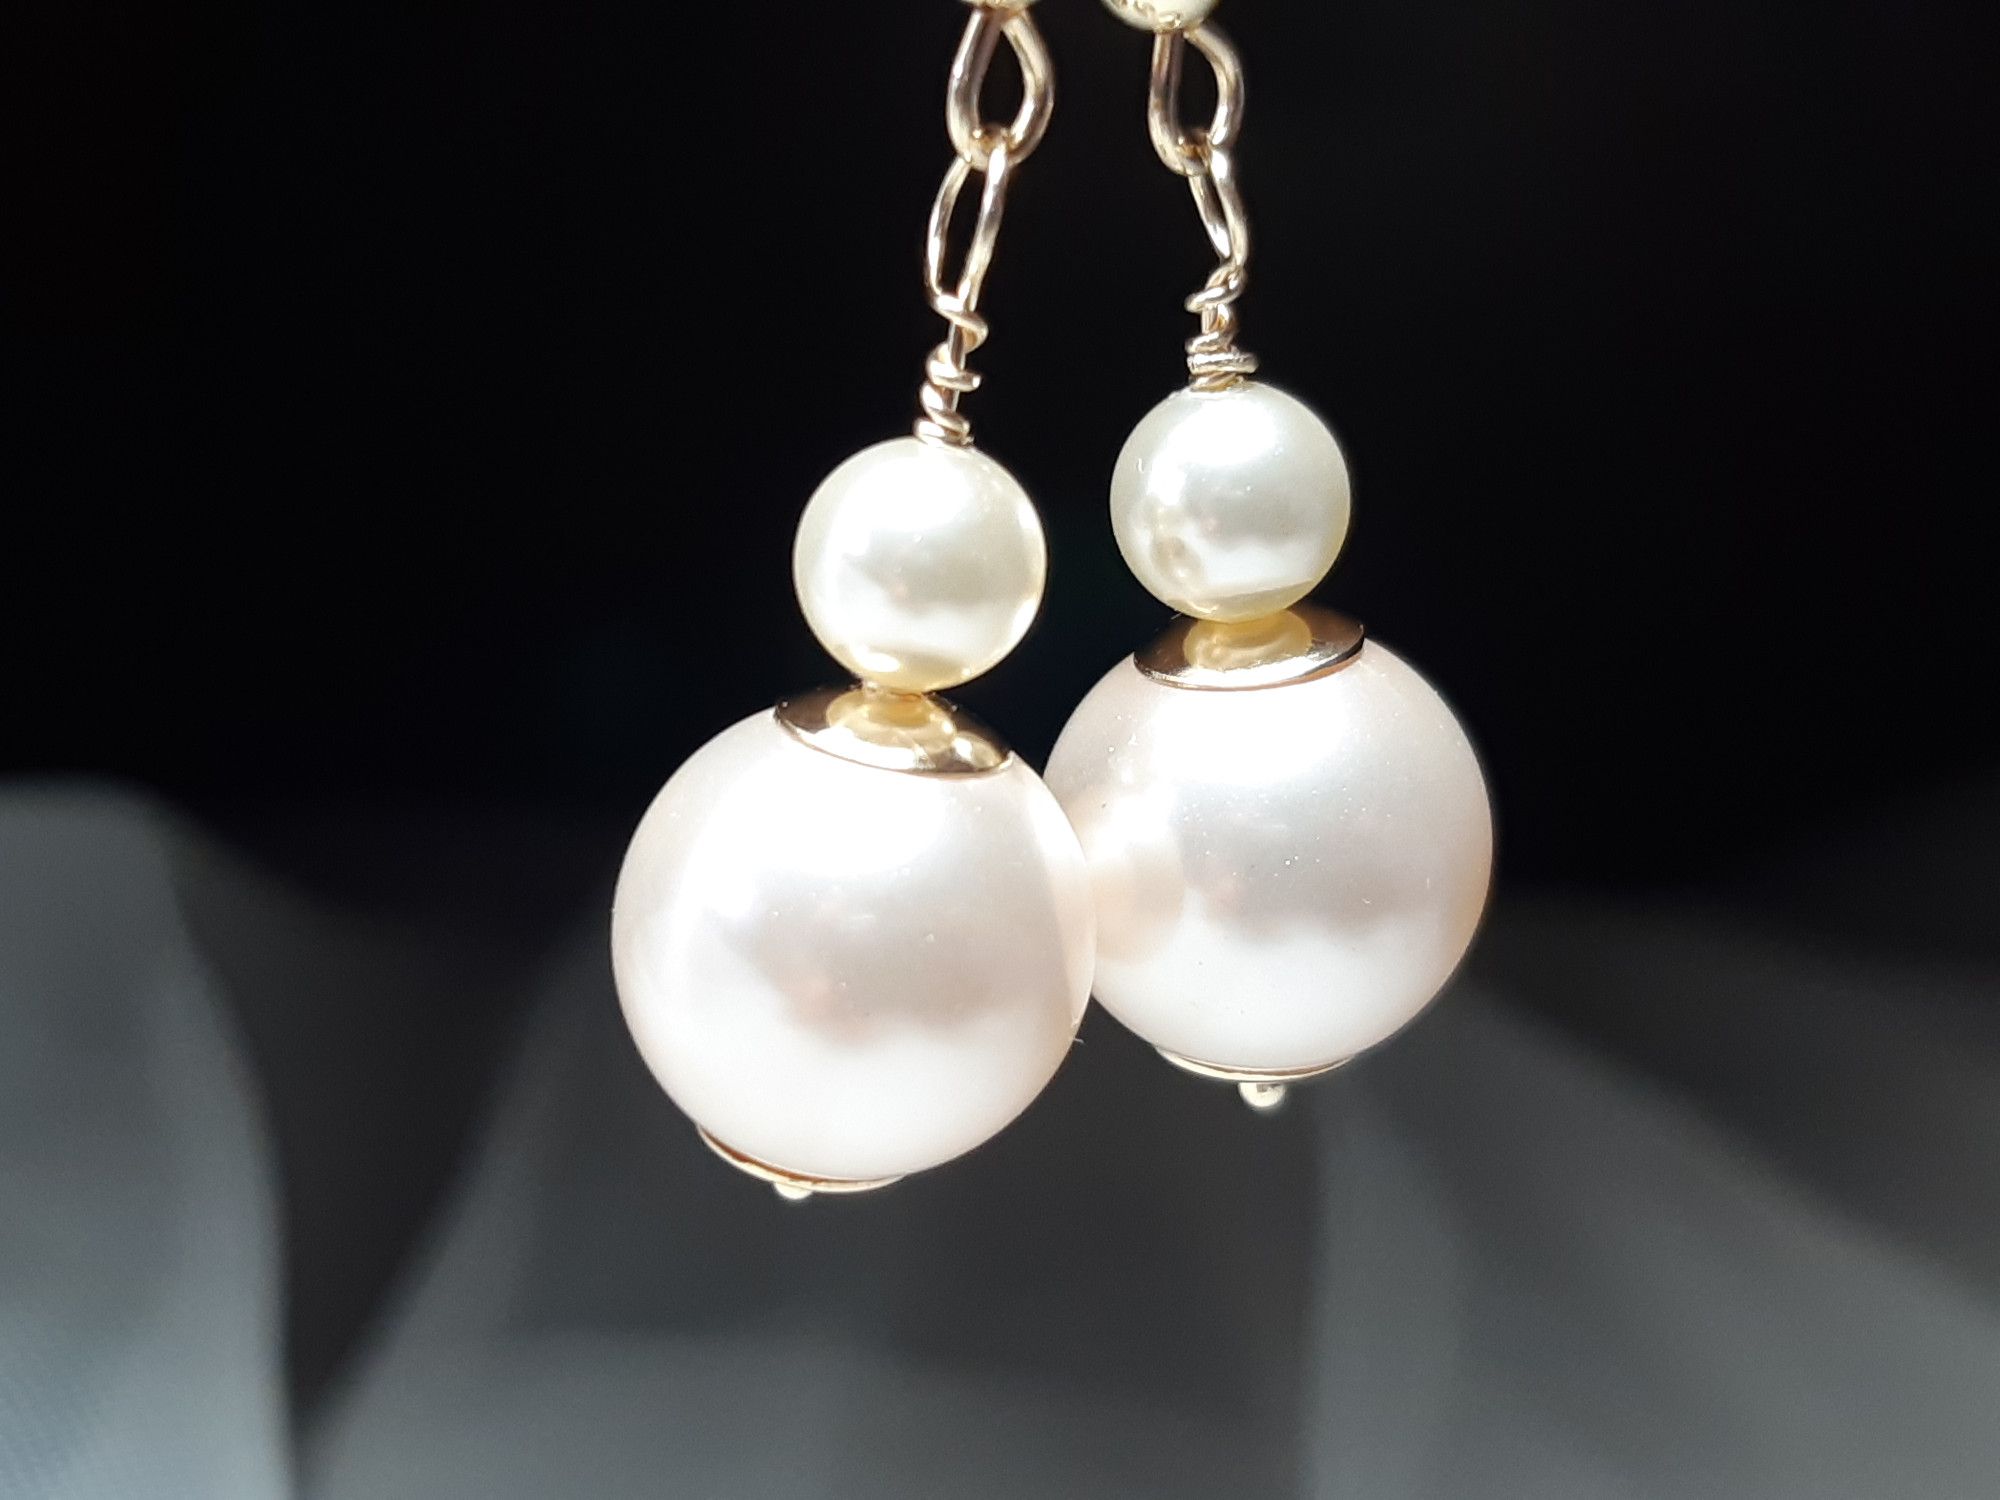 Occasion-bridal-wedding-earrings with 14K gold & pearls-4.jpg